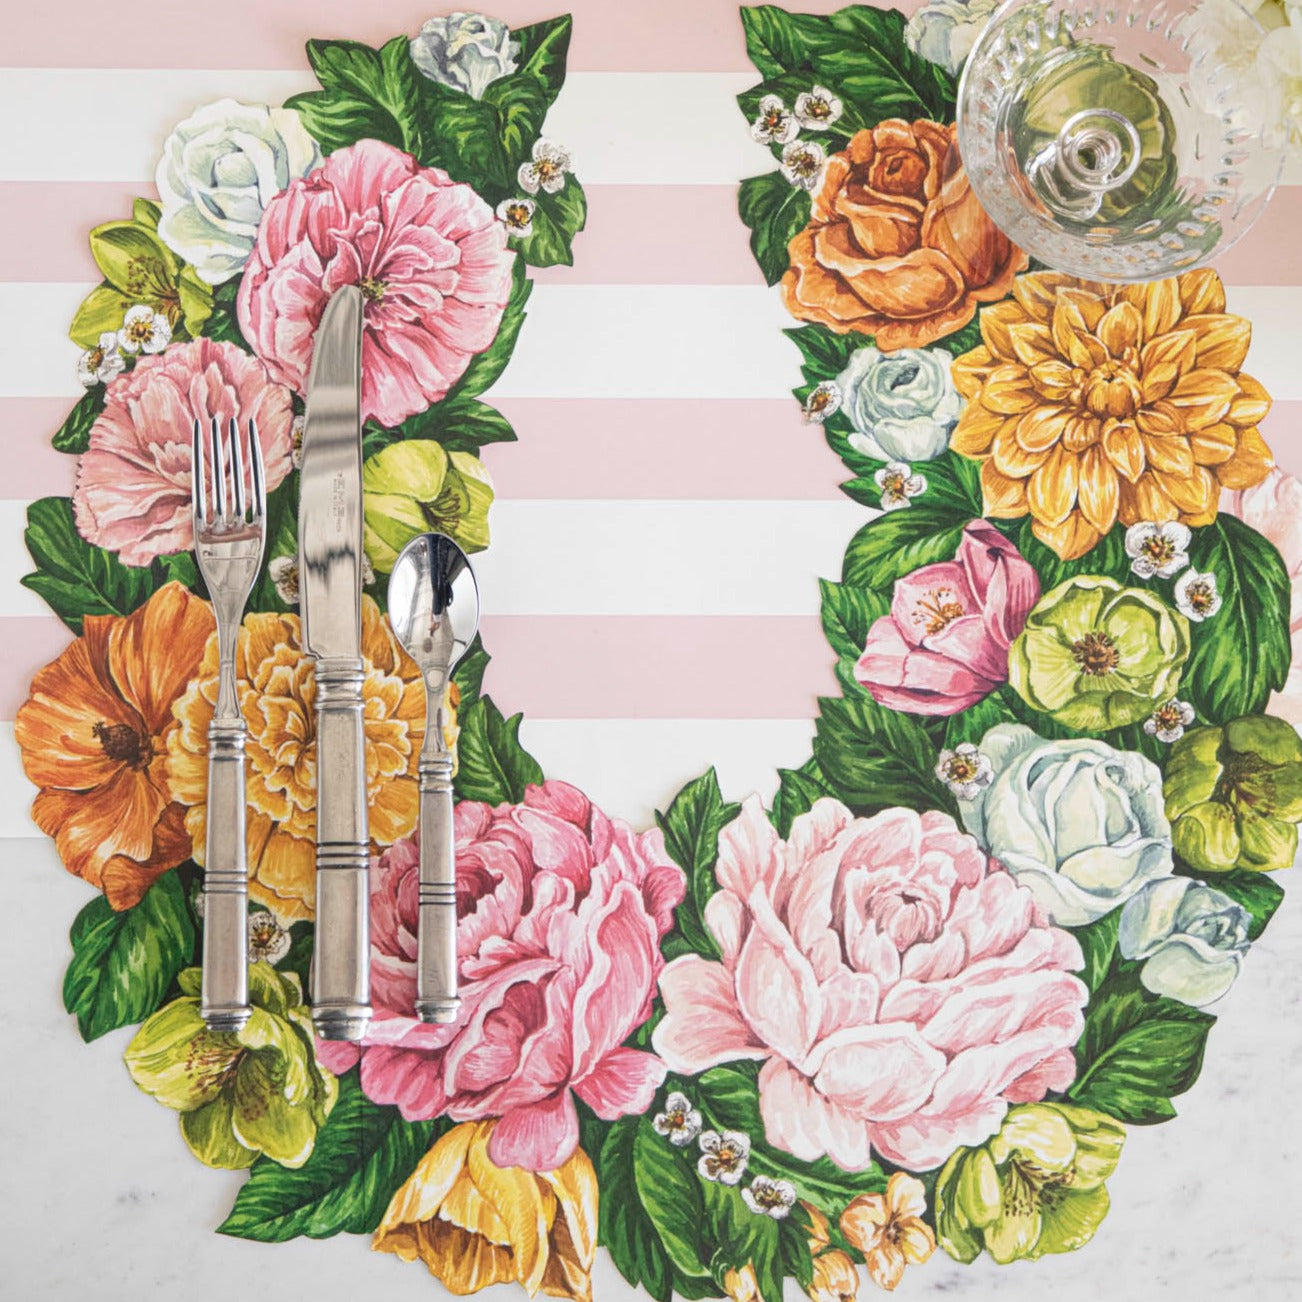 Hester &amp; Cook Die-cut Derby Wreath Placemat with flowers on it.